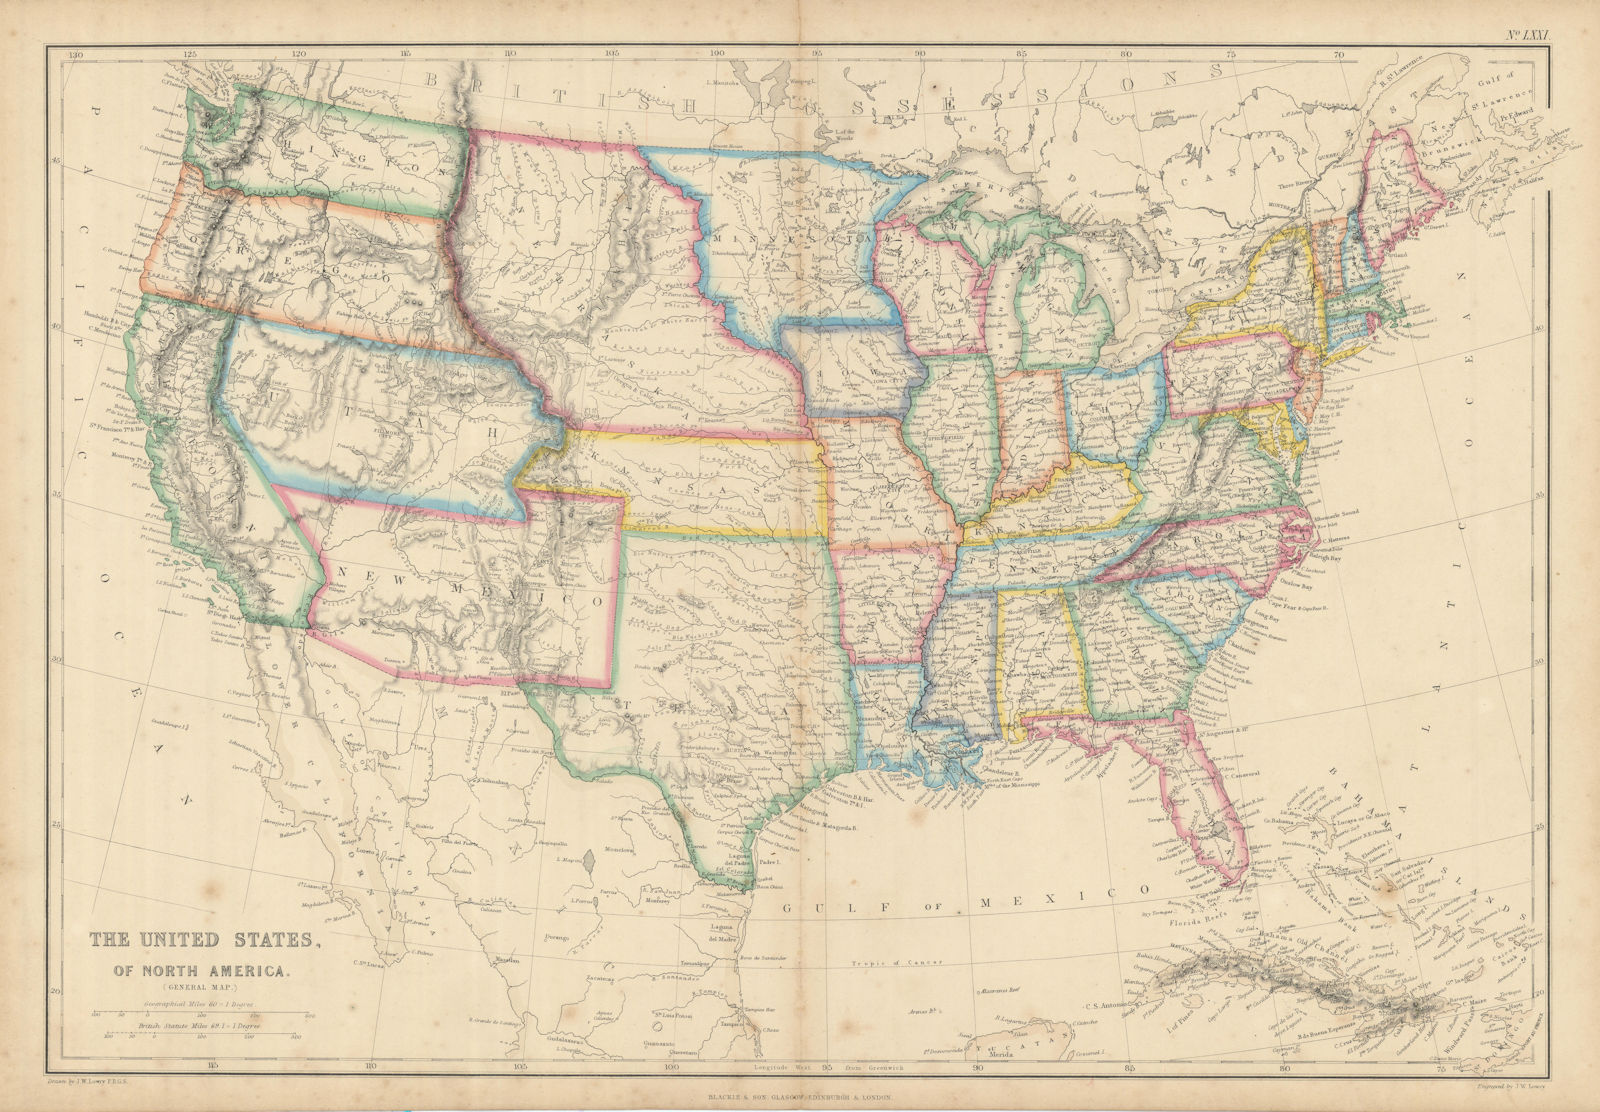 United States of North America. Early territorial boundaries. LOWRY 1860 map